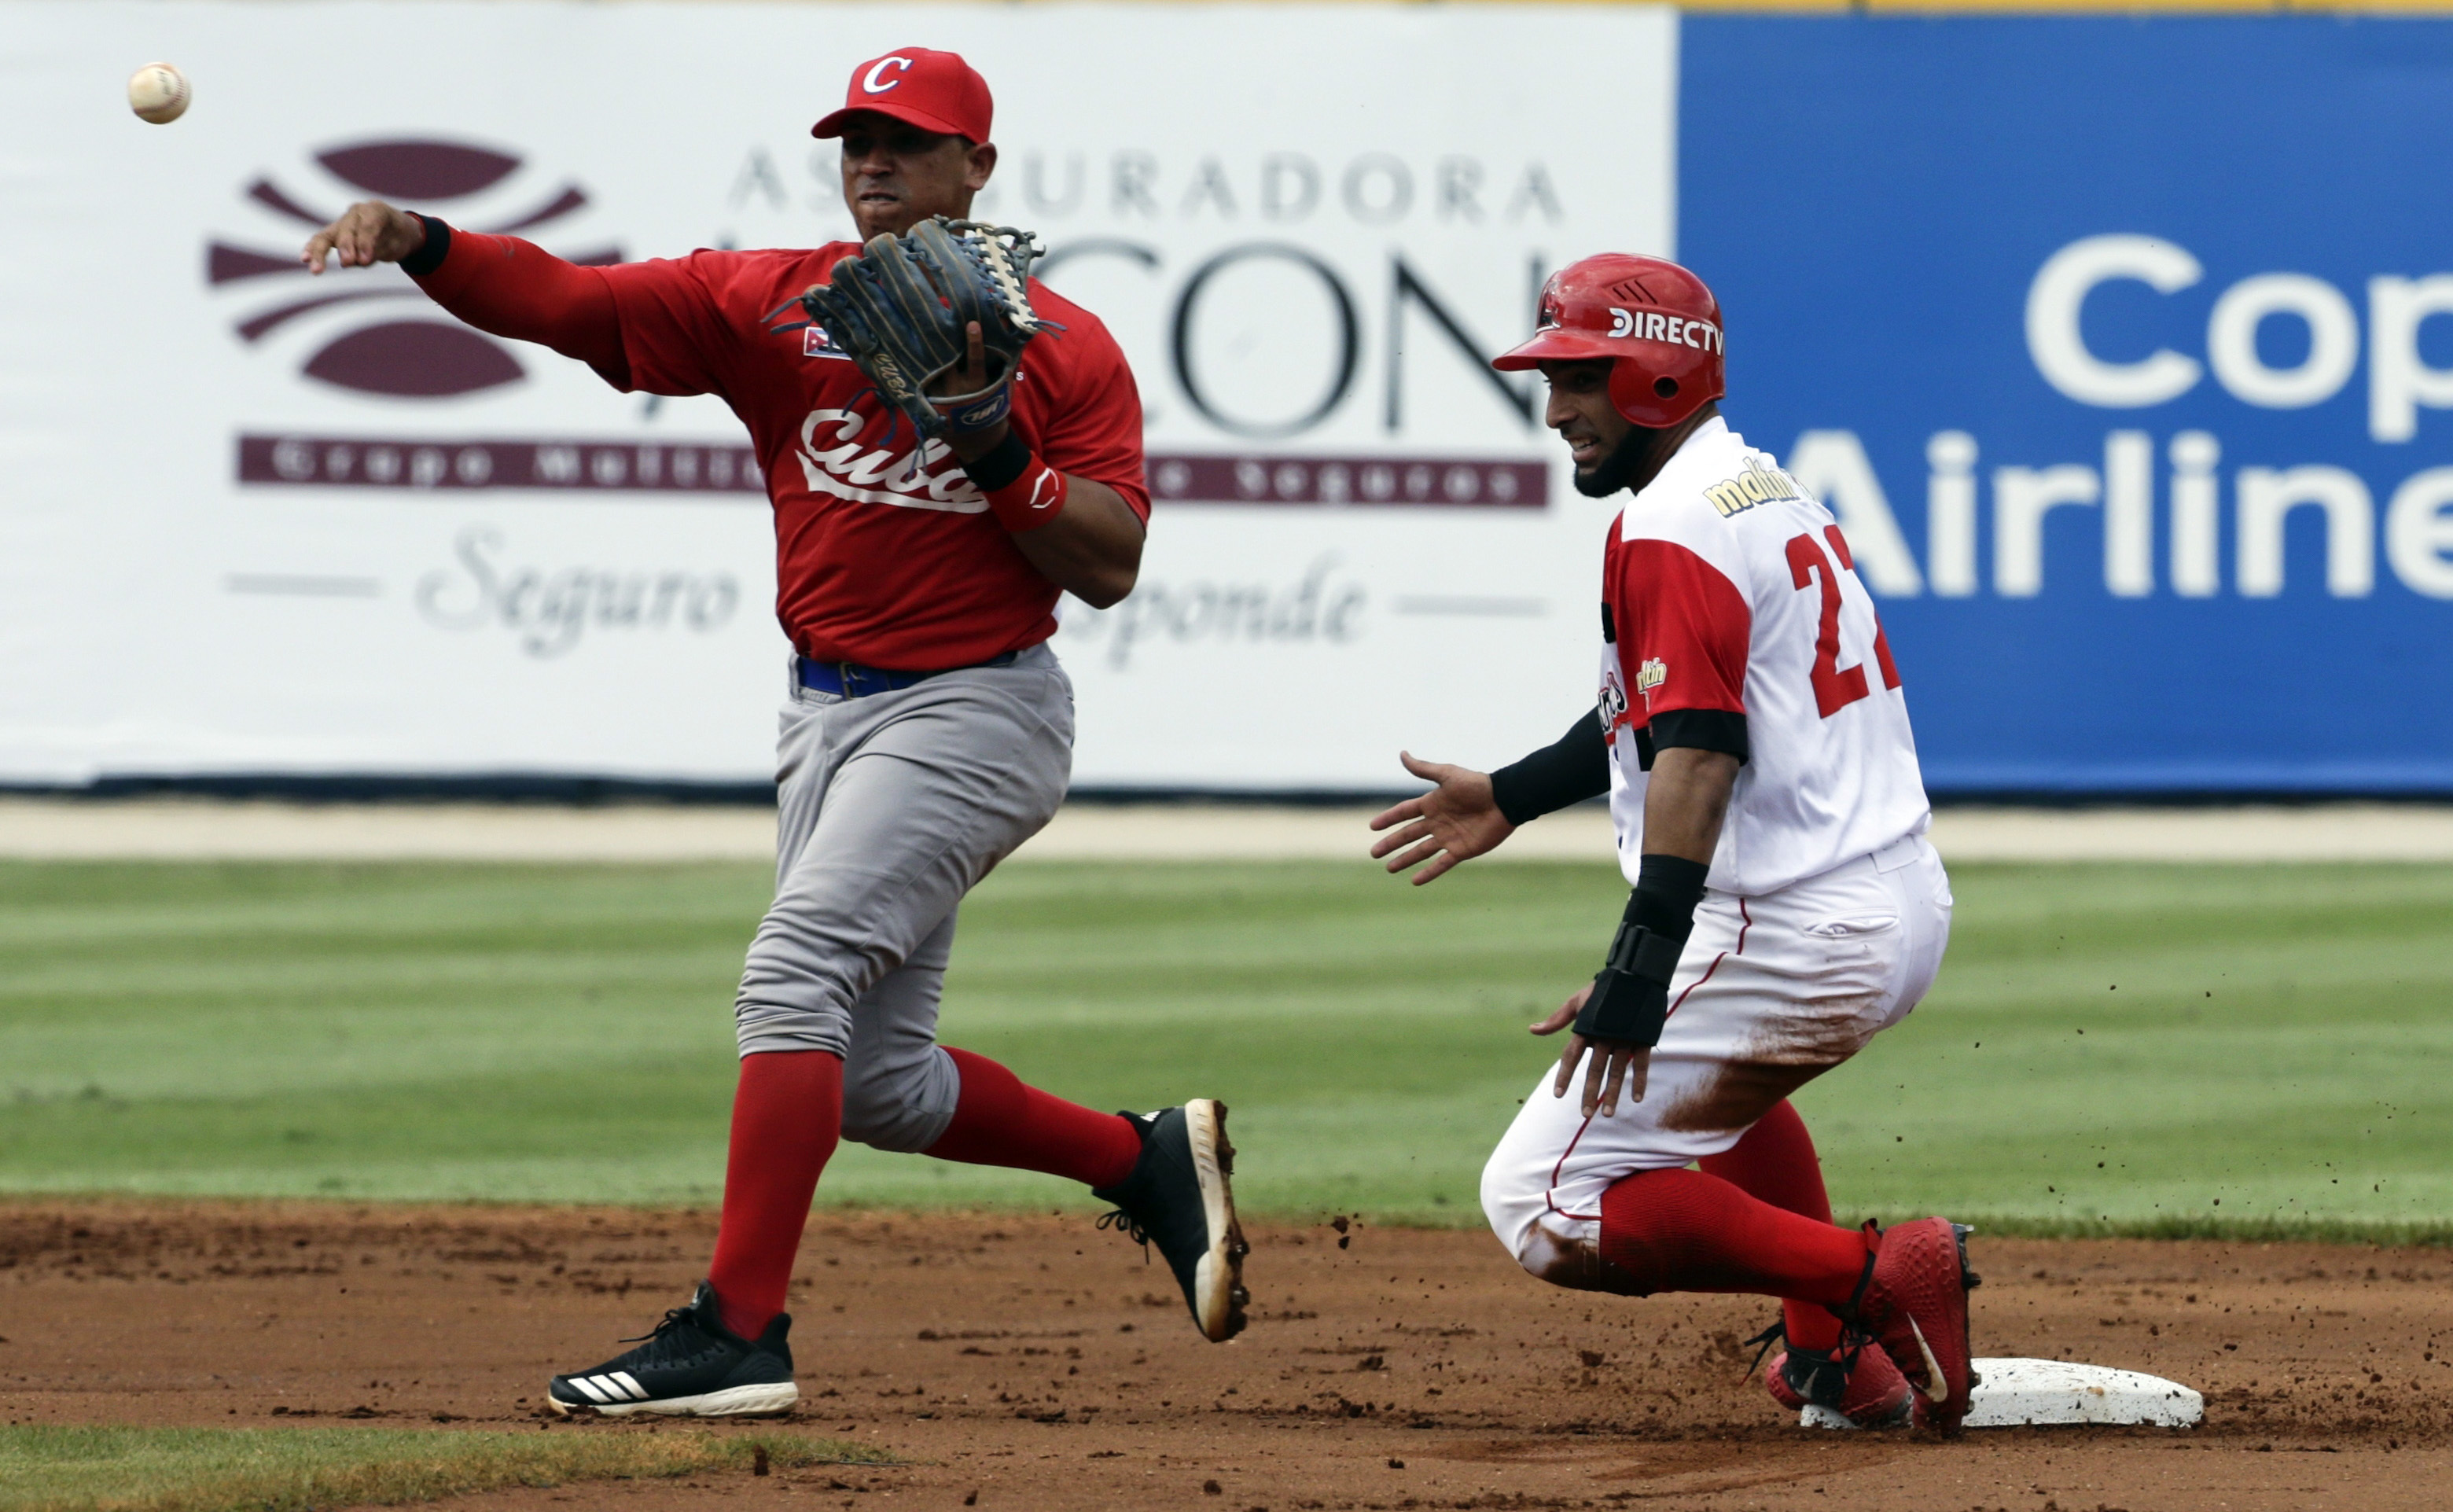 Men's Baseball Venezuela make it two from two with victory over Cuba